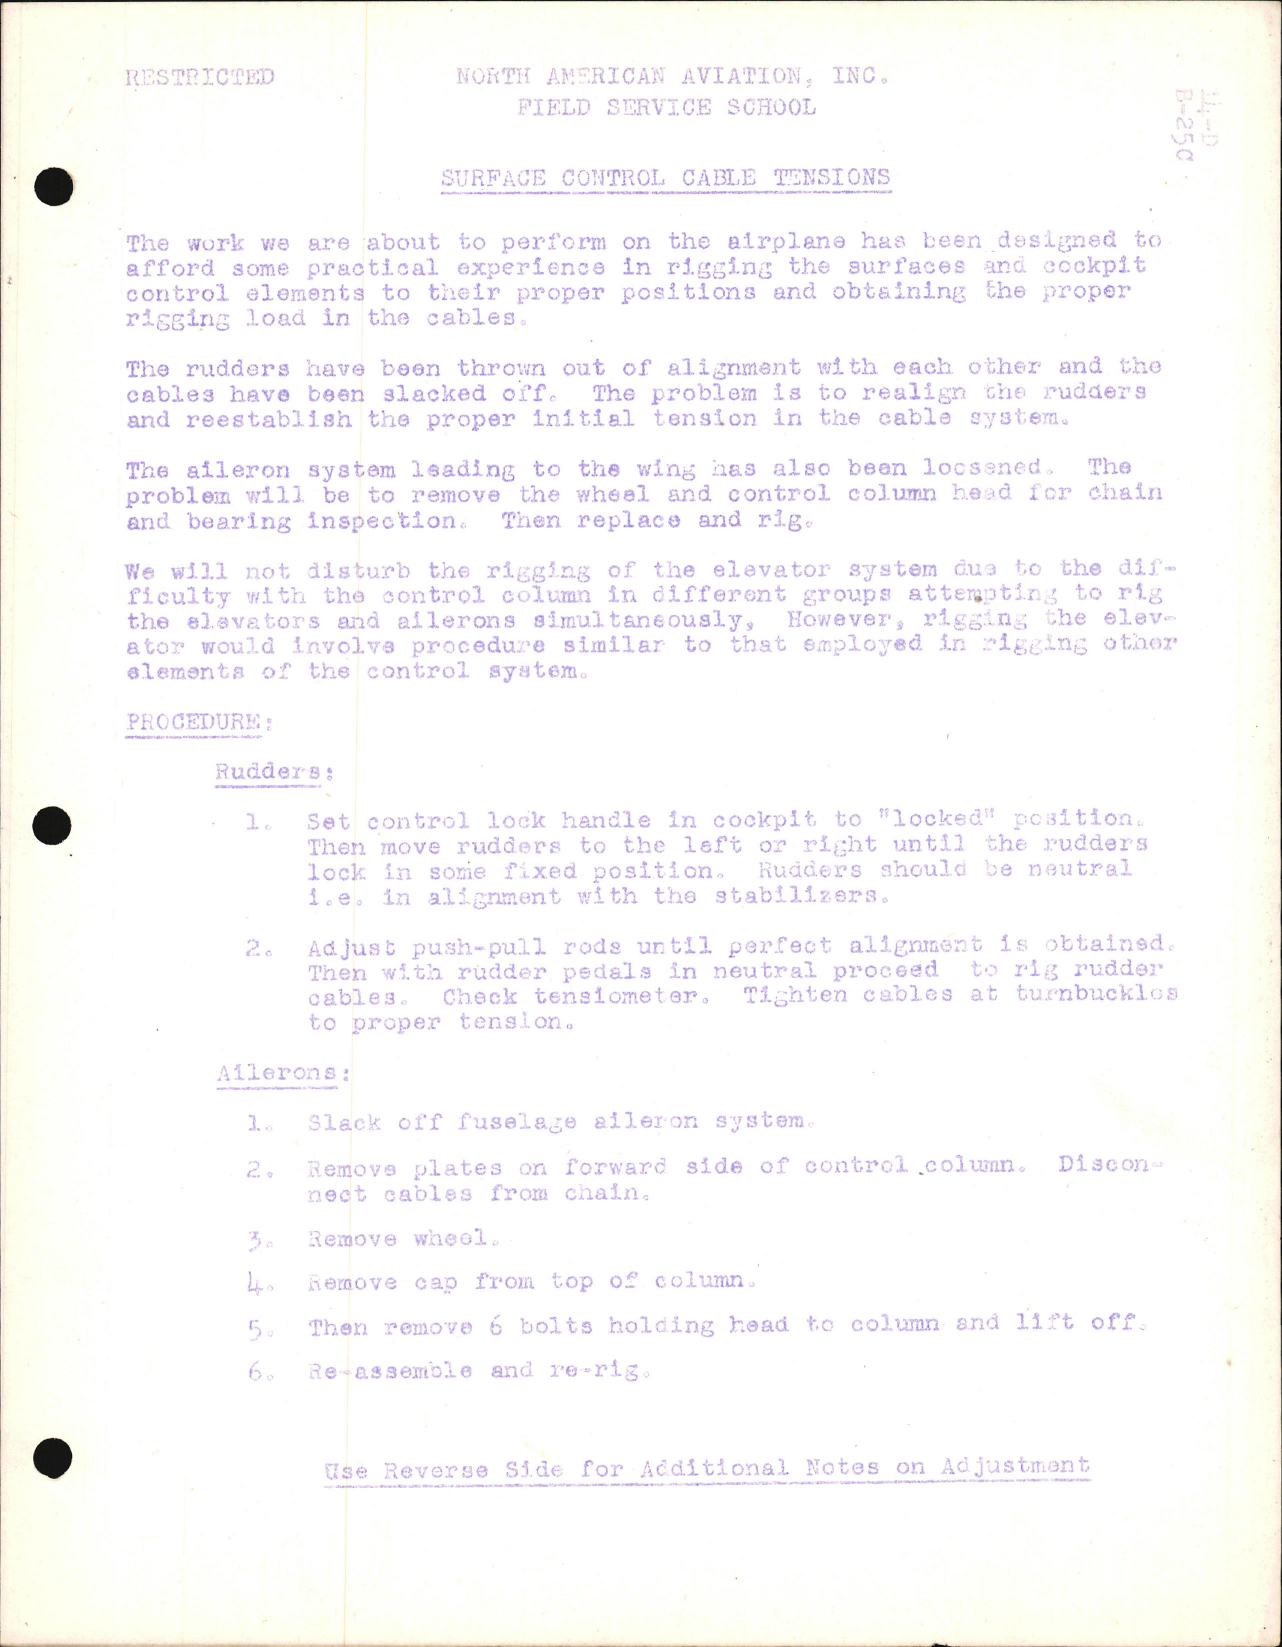 Sample page 5 from AirCorps Library document: Service School Lectures - Surface Controls